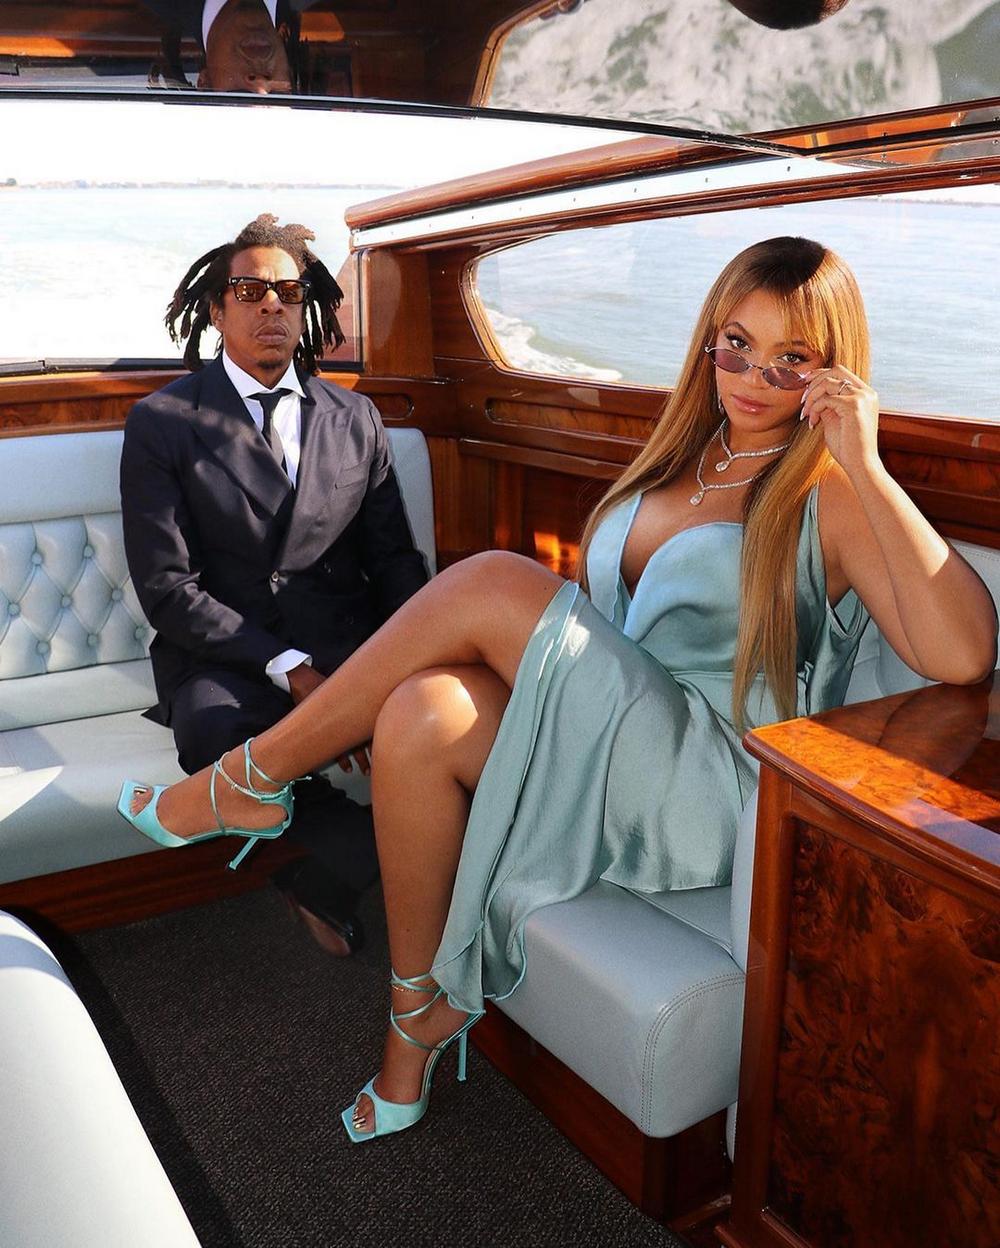 With hubby Jay-Z in tow, Beyoncé made waves looking ethereal in aqua blue  attire on a luxury speedboat in Venice. - Luxurylaunches